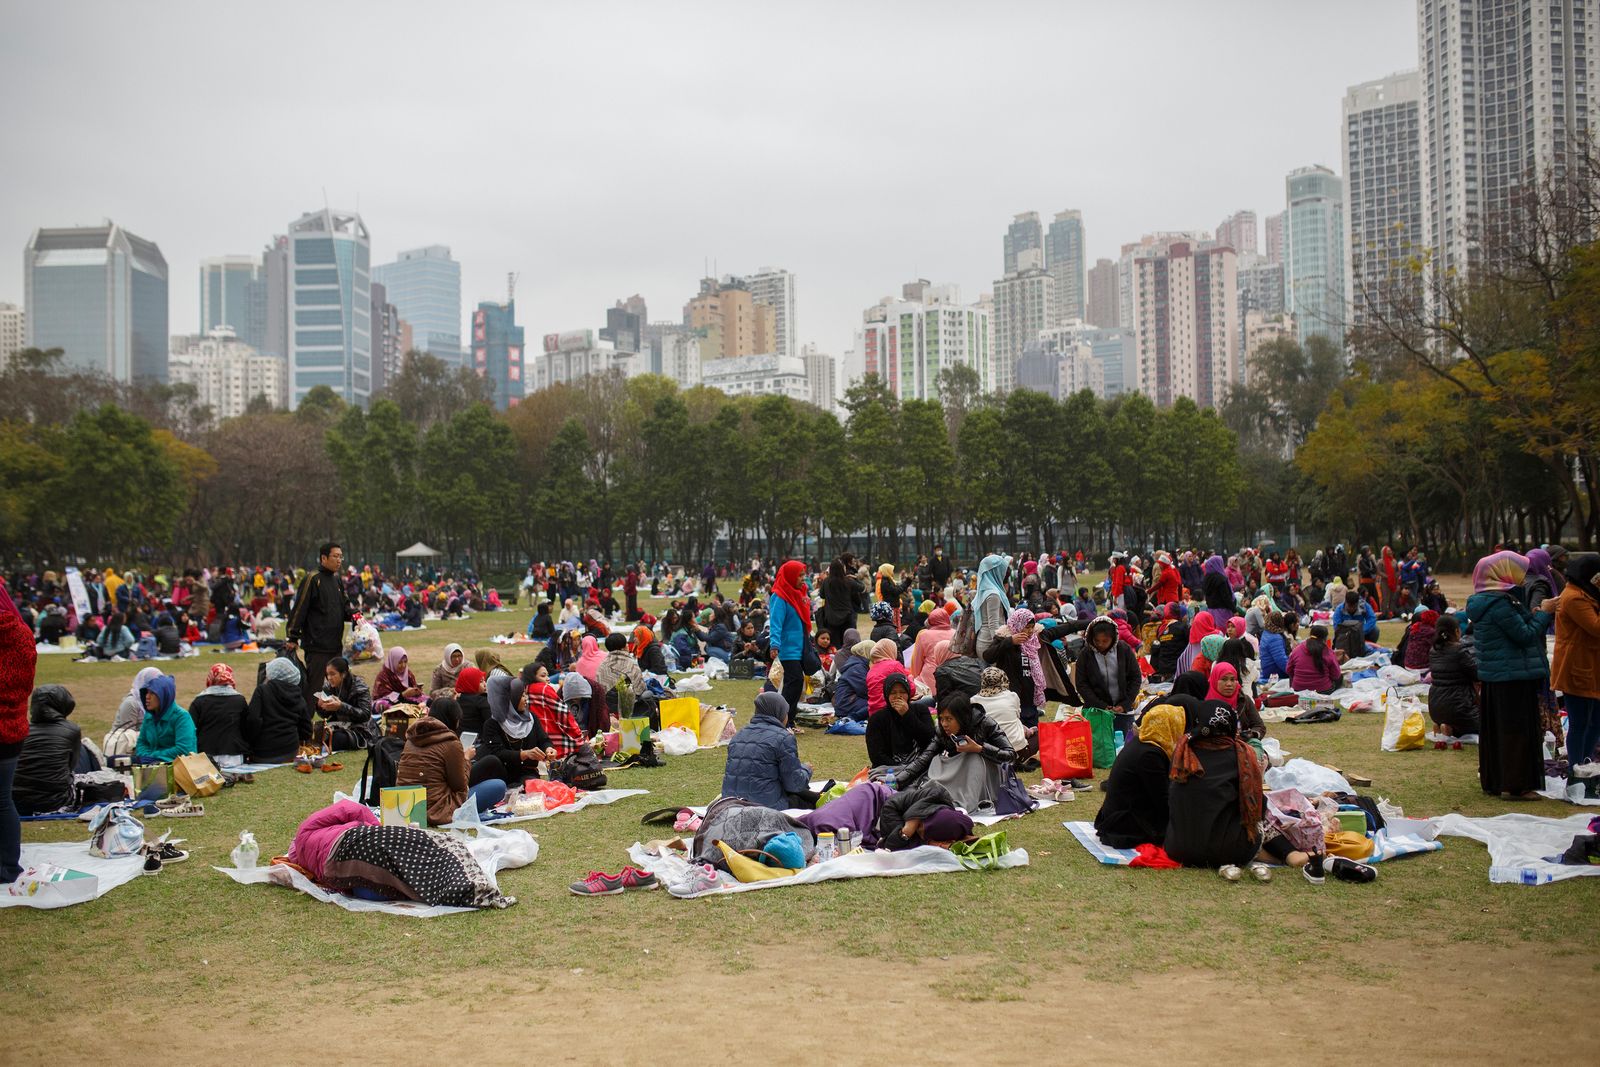 © Rebecca Sampson - Gathering of Indonesian housemaids on their day off - Victoria Park, Hong Kong